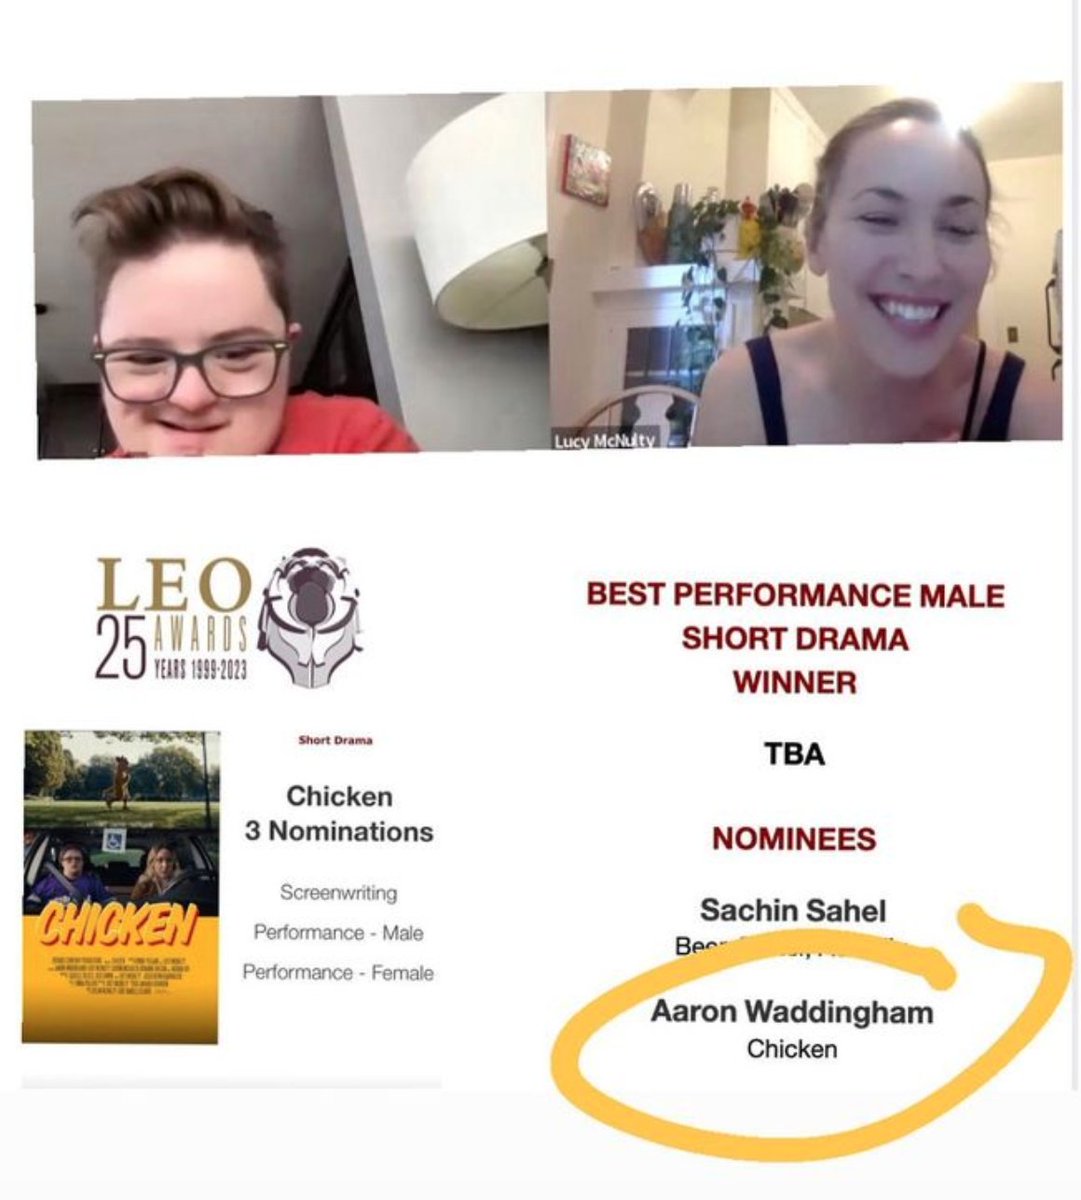 One of Ready for My Shot's self-advocates, Aaron Waddingham, got nominated for a @leoawards for his role in @chickenthefilm. 

Don't let anybody tell you what your loved one CAN or CANNOT do.  

All we need is opportunity. @RudermanFdn #DisabilityRepresentation